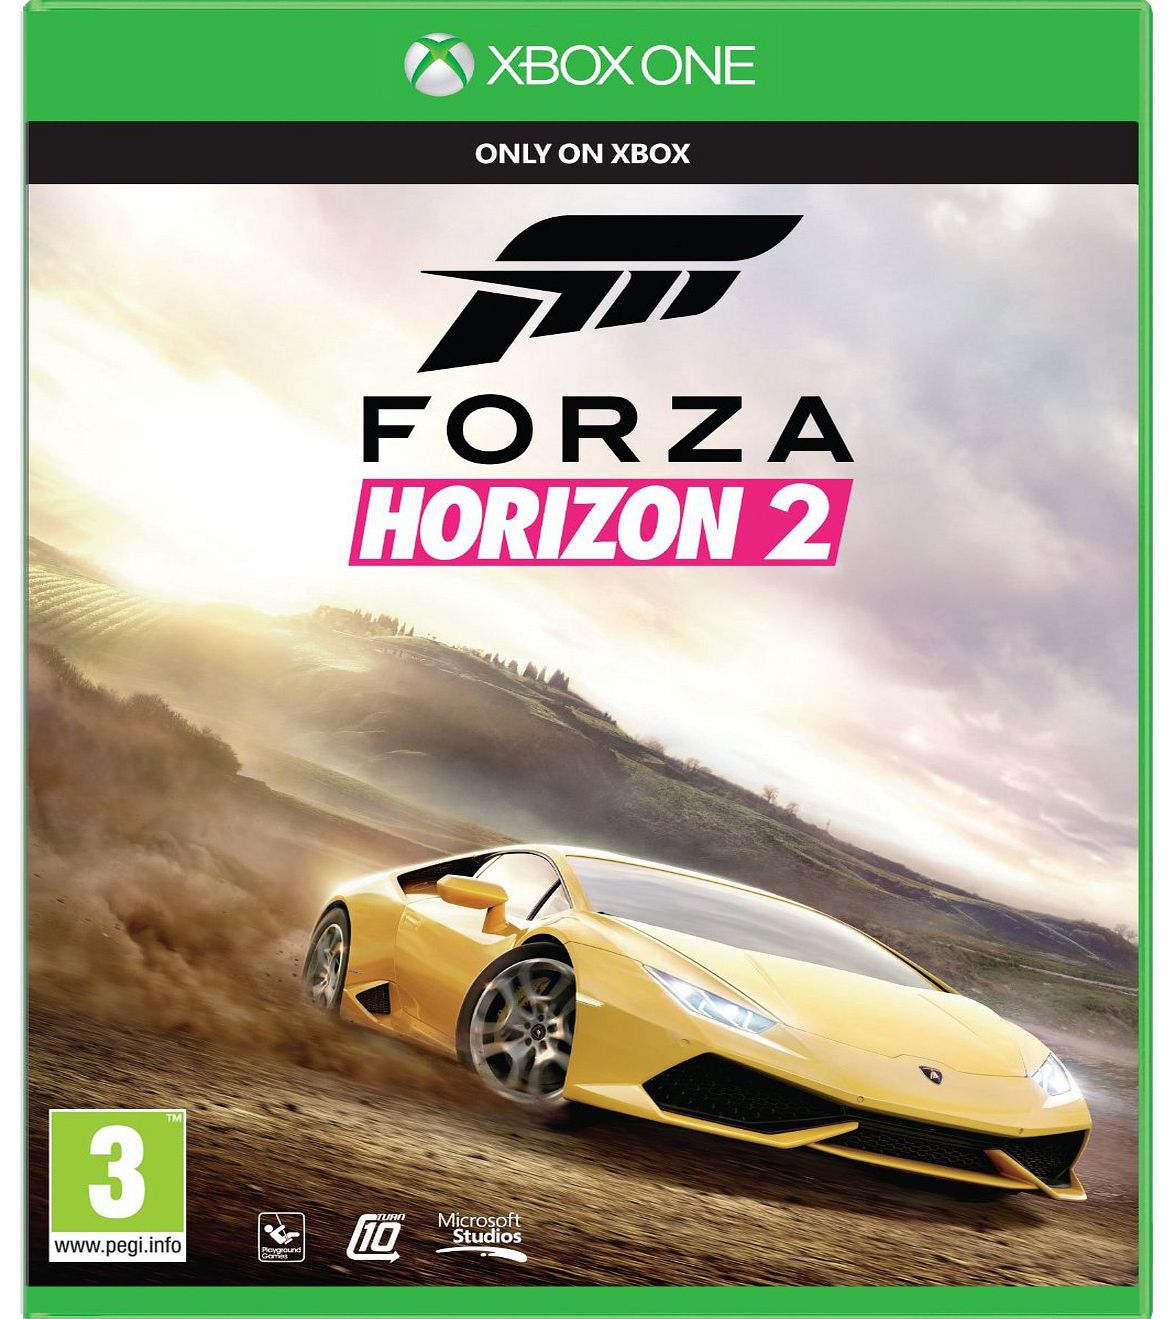 FORZAHORIZONS2 Console Games and